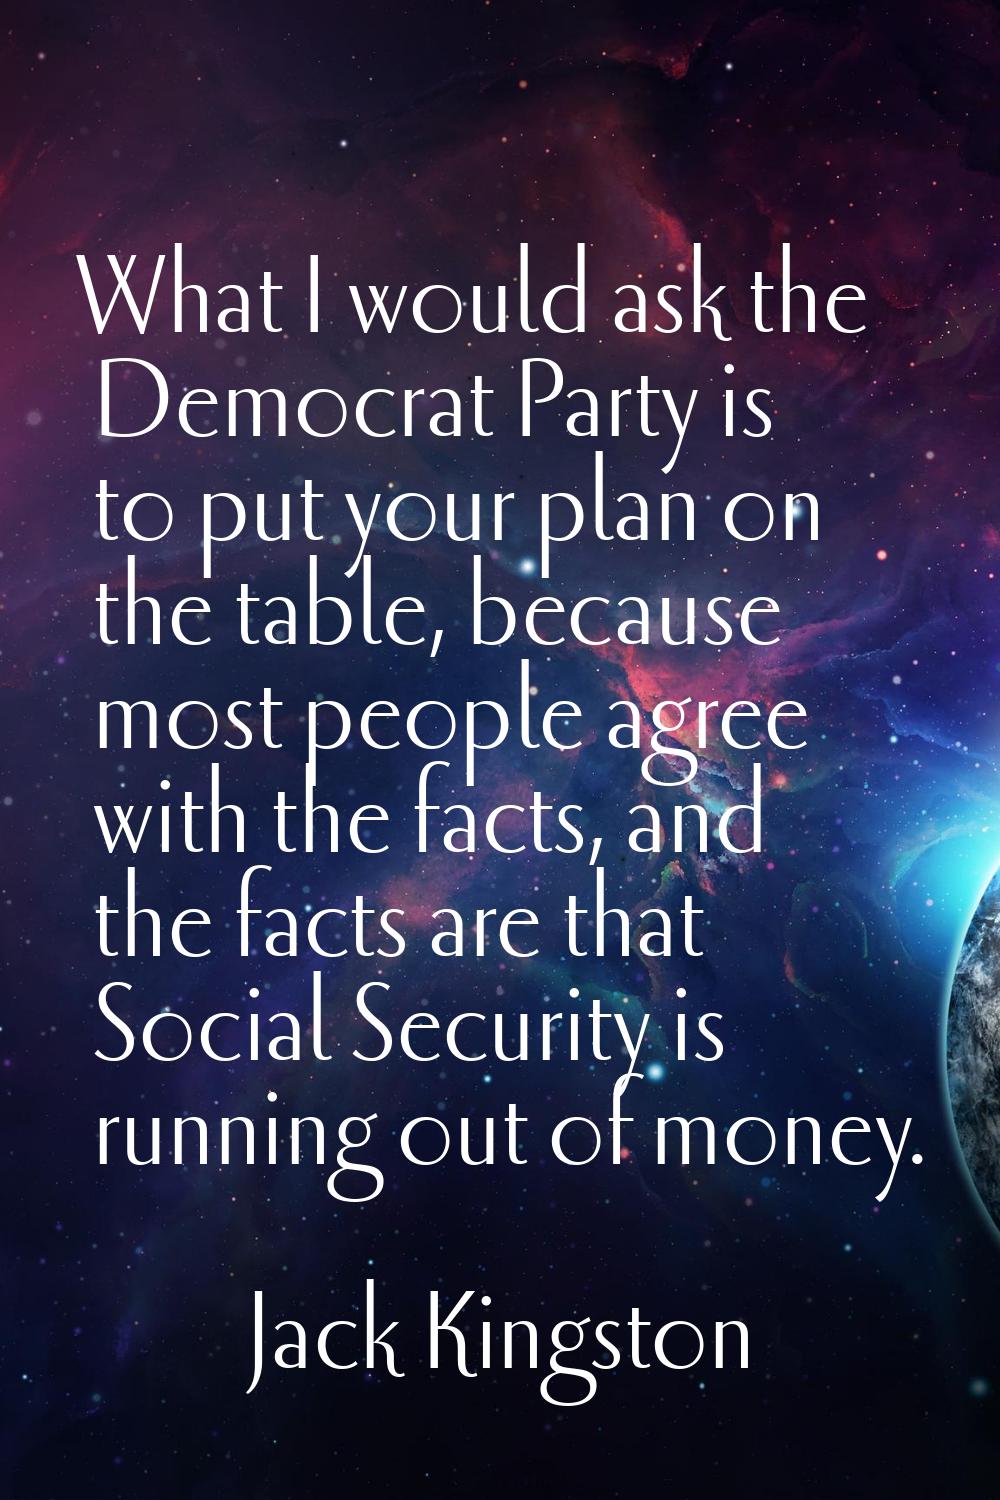 What I would ask the Democrat Party is to put your plan on the table, because most people agree wit